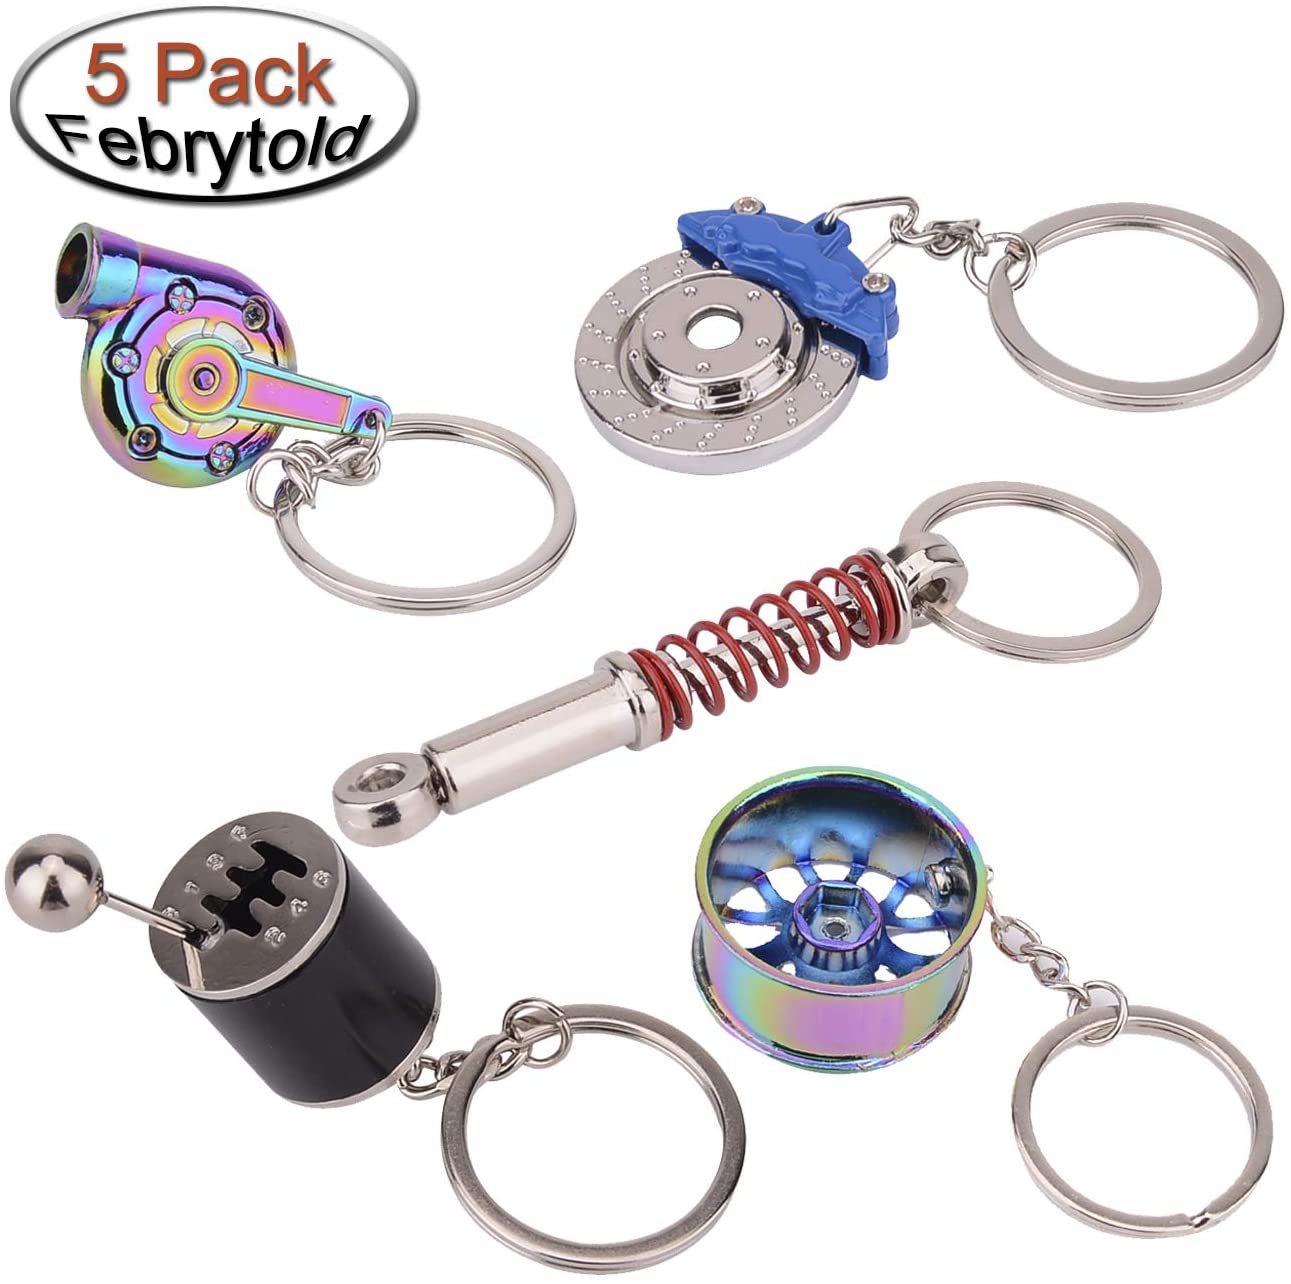 Febrytold 5 Pcs Car Parts Model Key Chains, Colorful Turbo Keychain, Black Manual Gearbox Keychain, Colorful Tire Rim Keychain, Blue Brake Rotor Keychain, Red Spring Shock-Absorber Keychain (5 Pack)